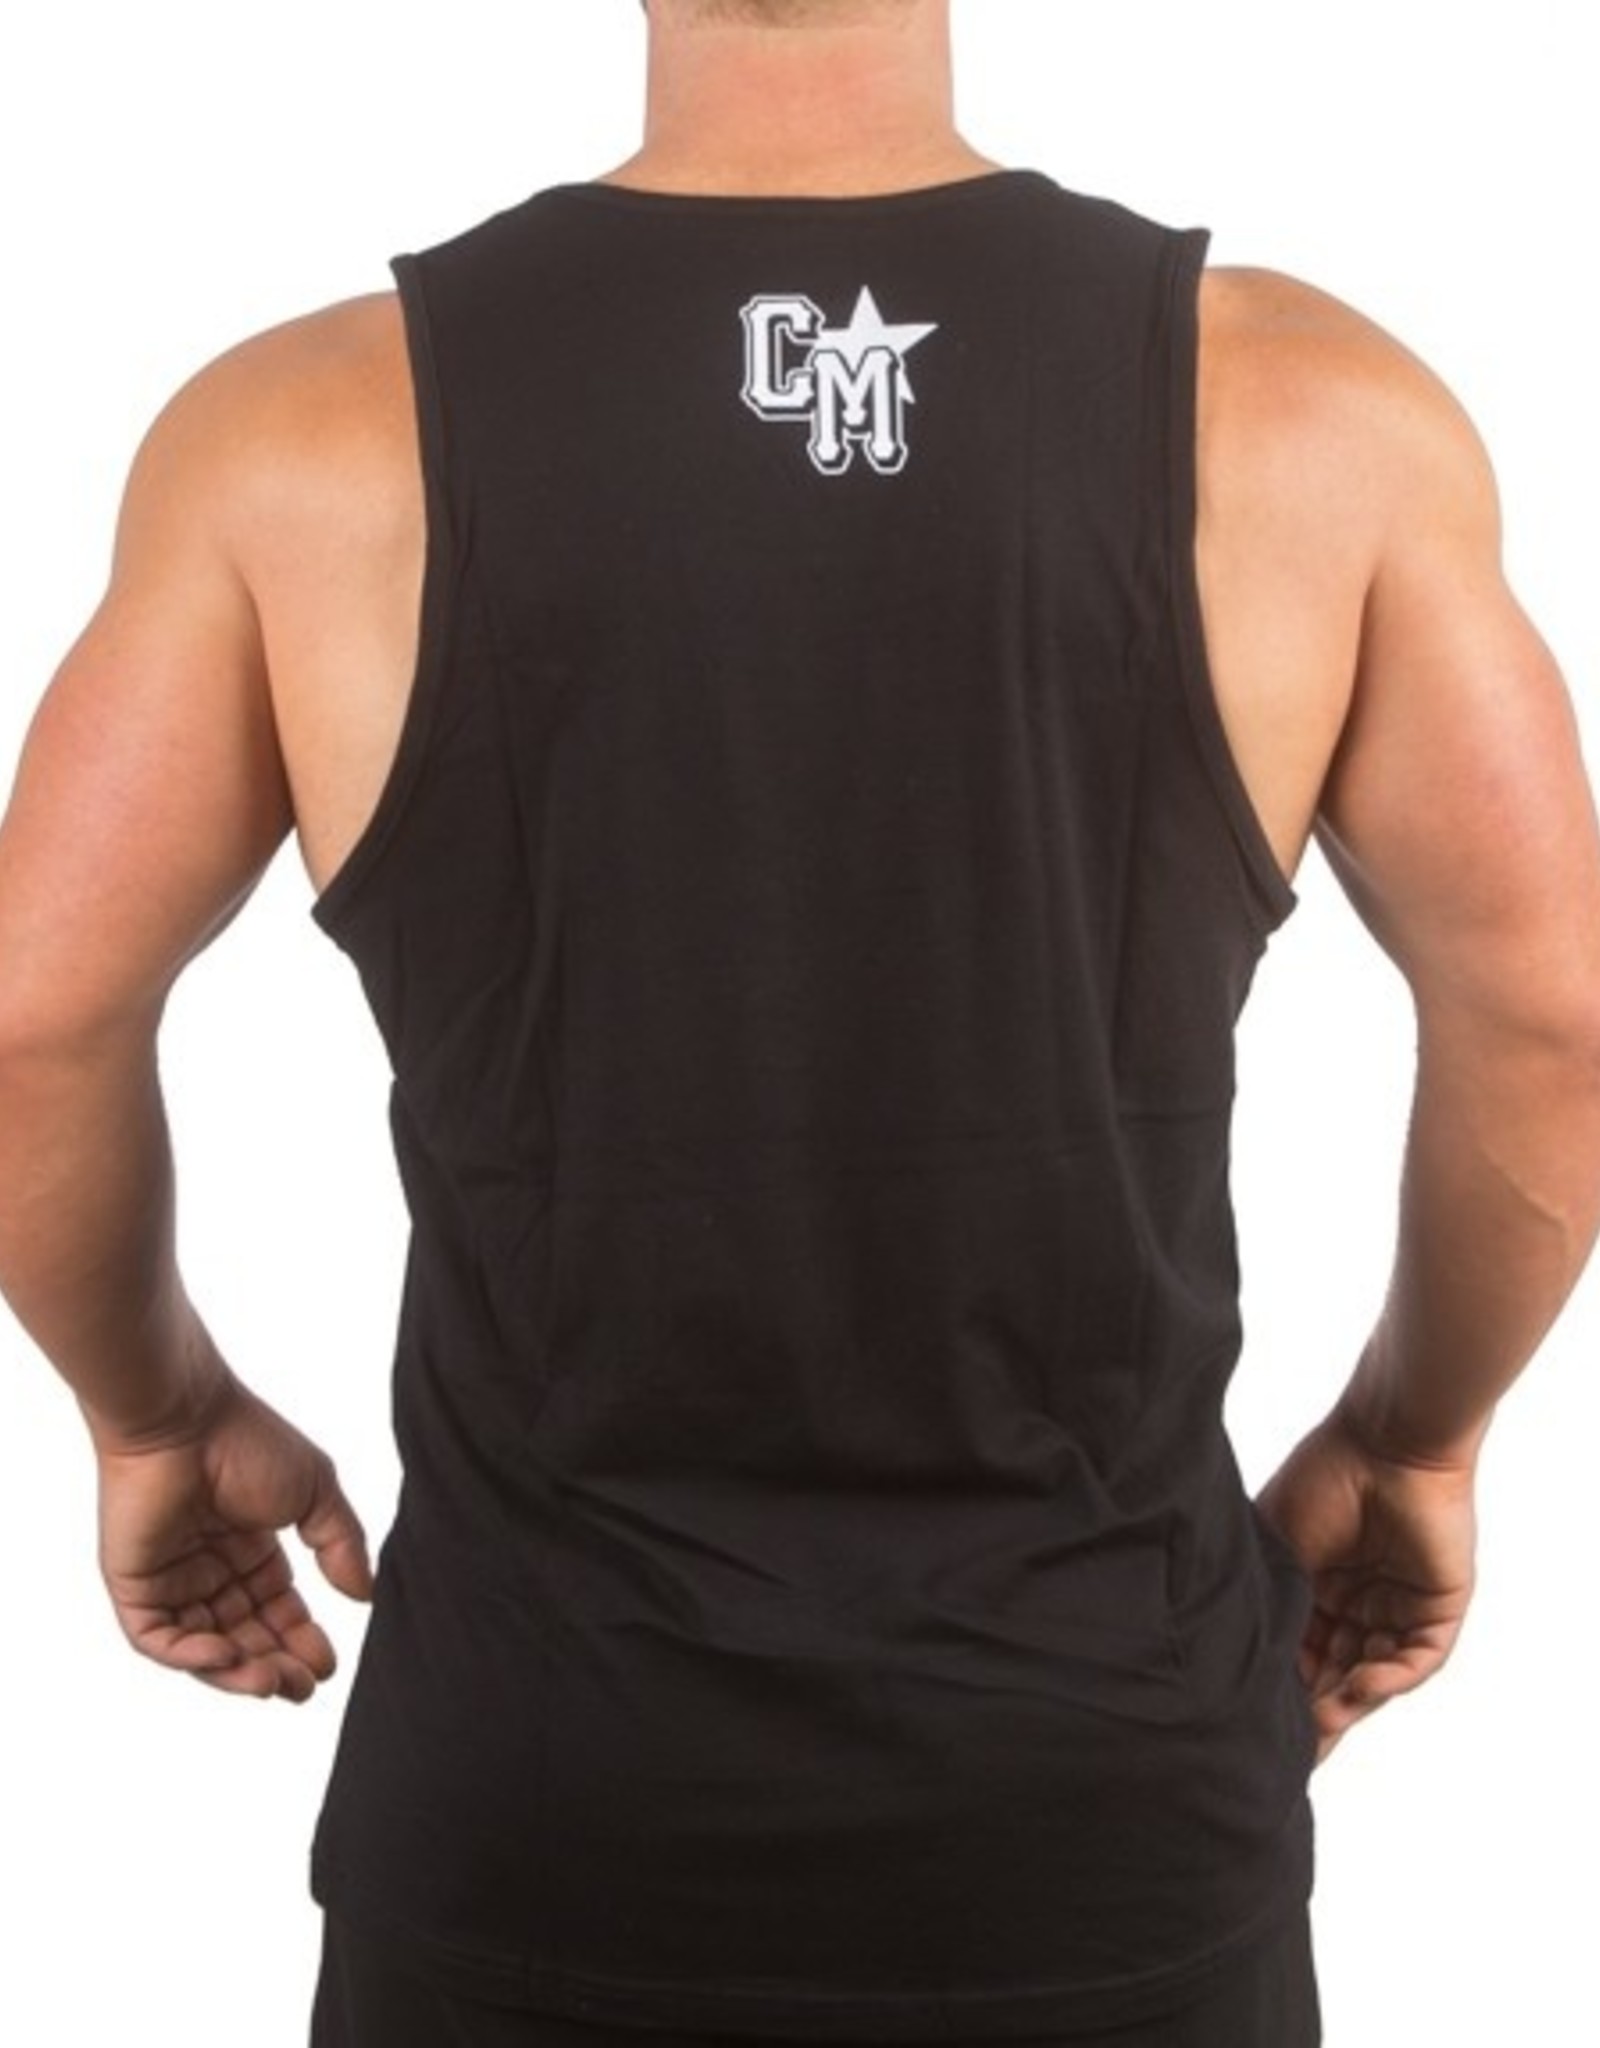 Cali Muscle Lifestyle Graphic Tank